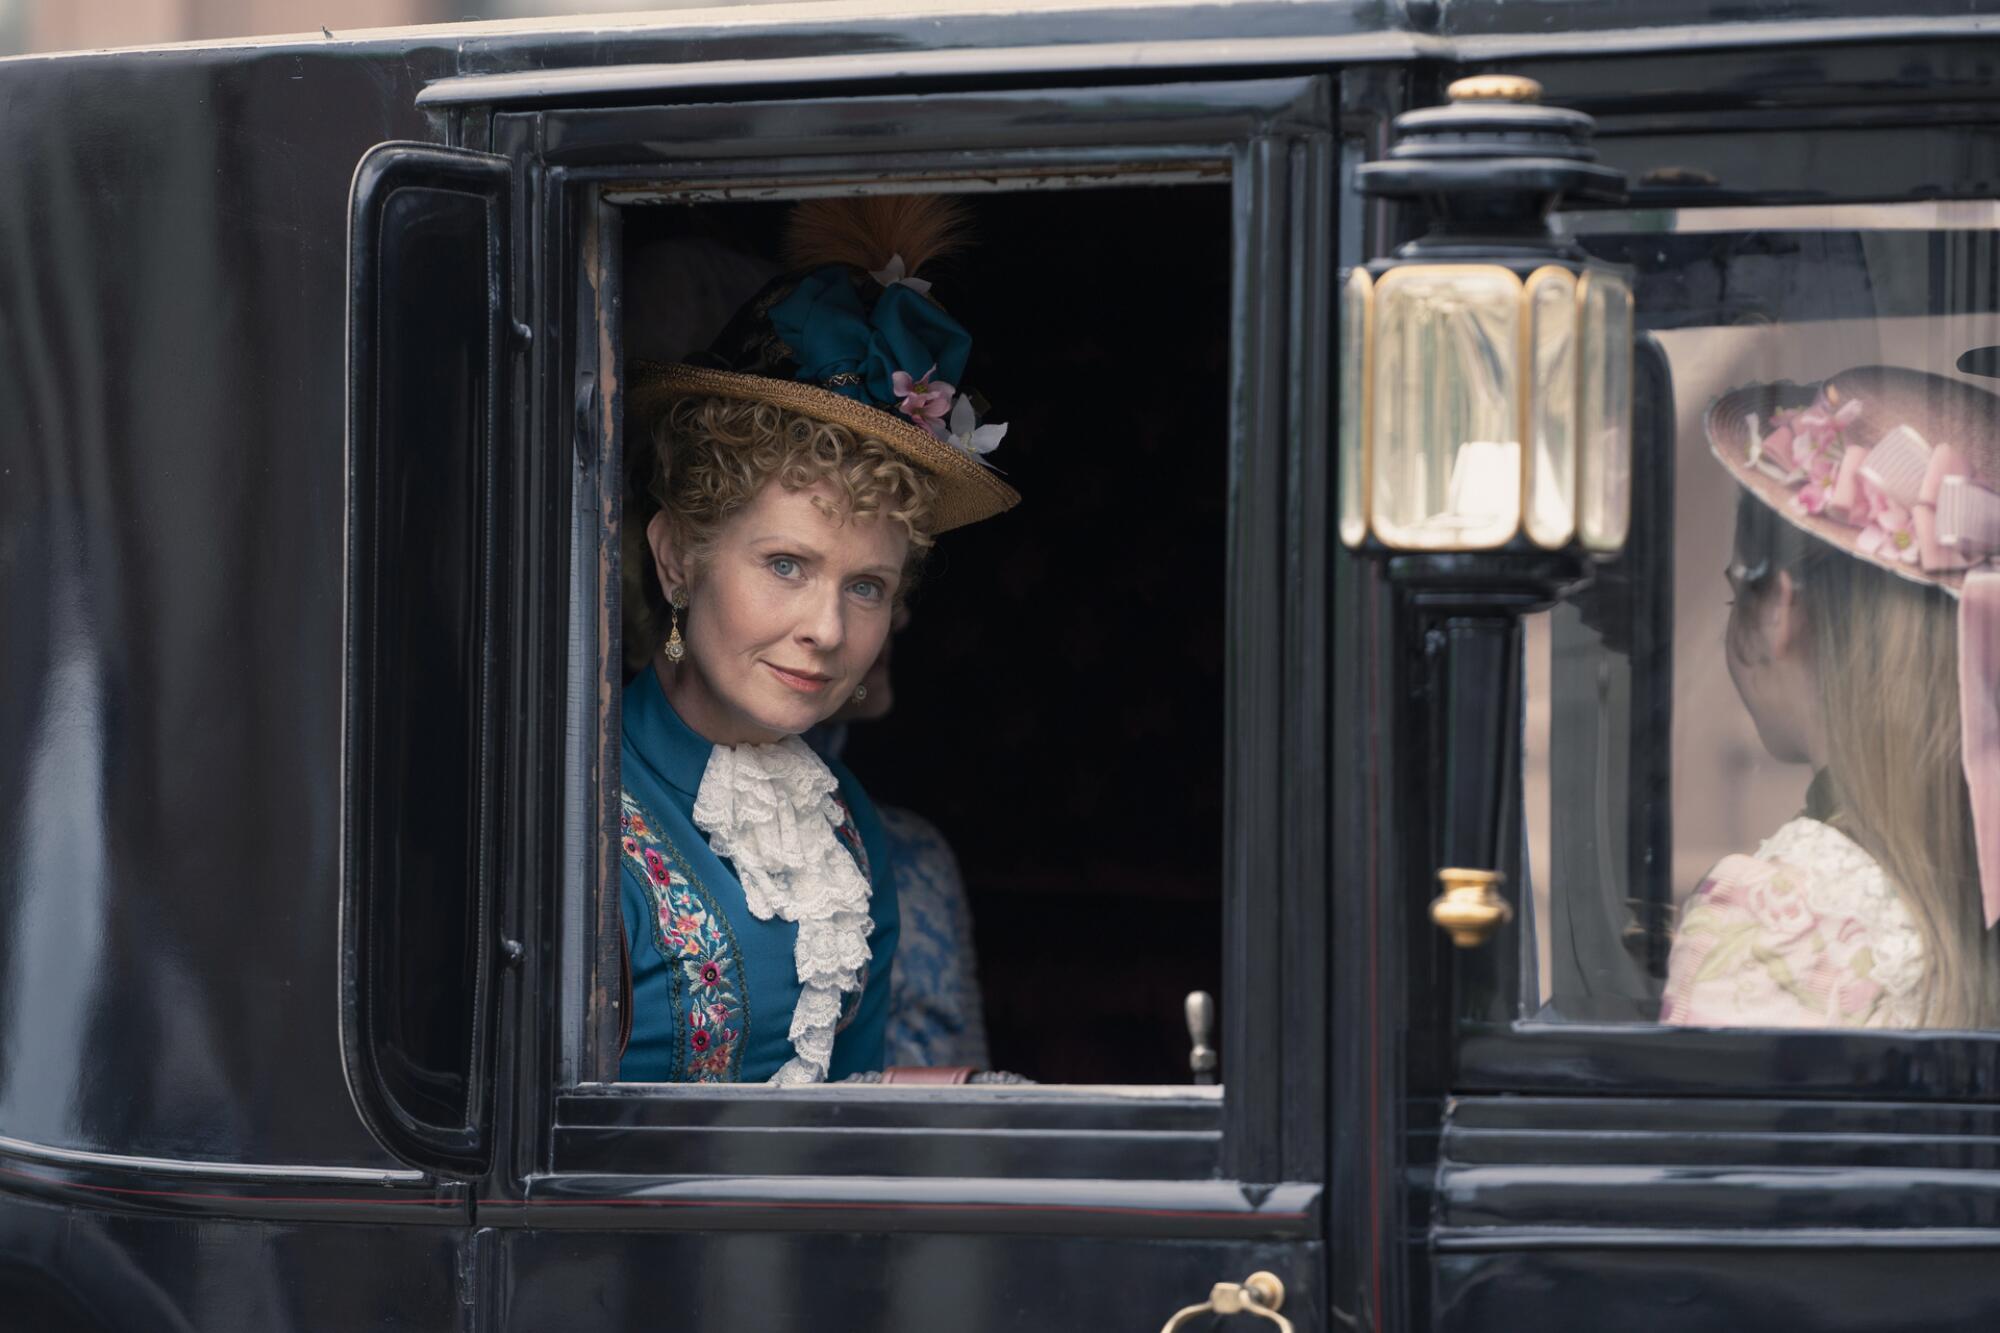 A woman in Gilded Age New York looks out the window of a carriage.